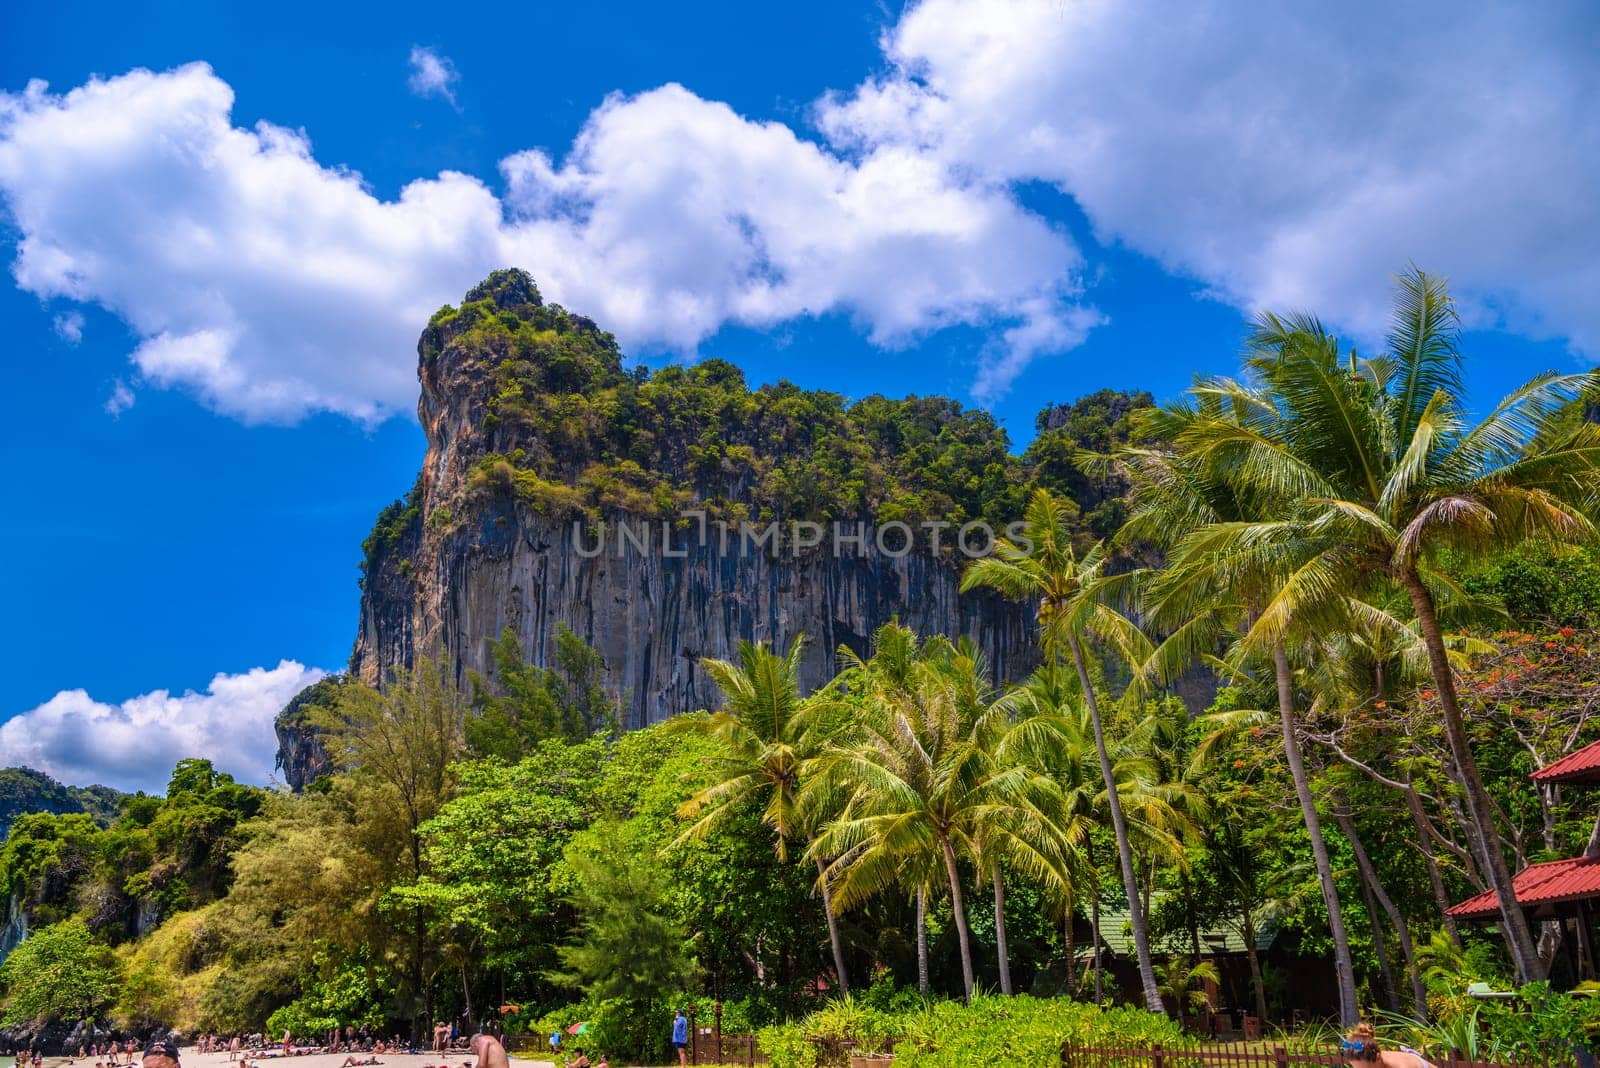 Rocks and cliffs, water and coconut palms, Railay beach west, Ao Nang, Krabi, Thailand.